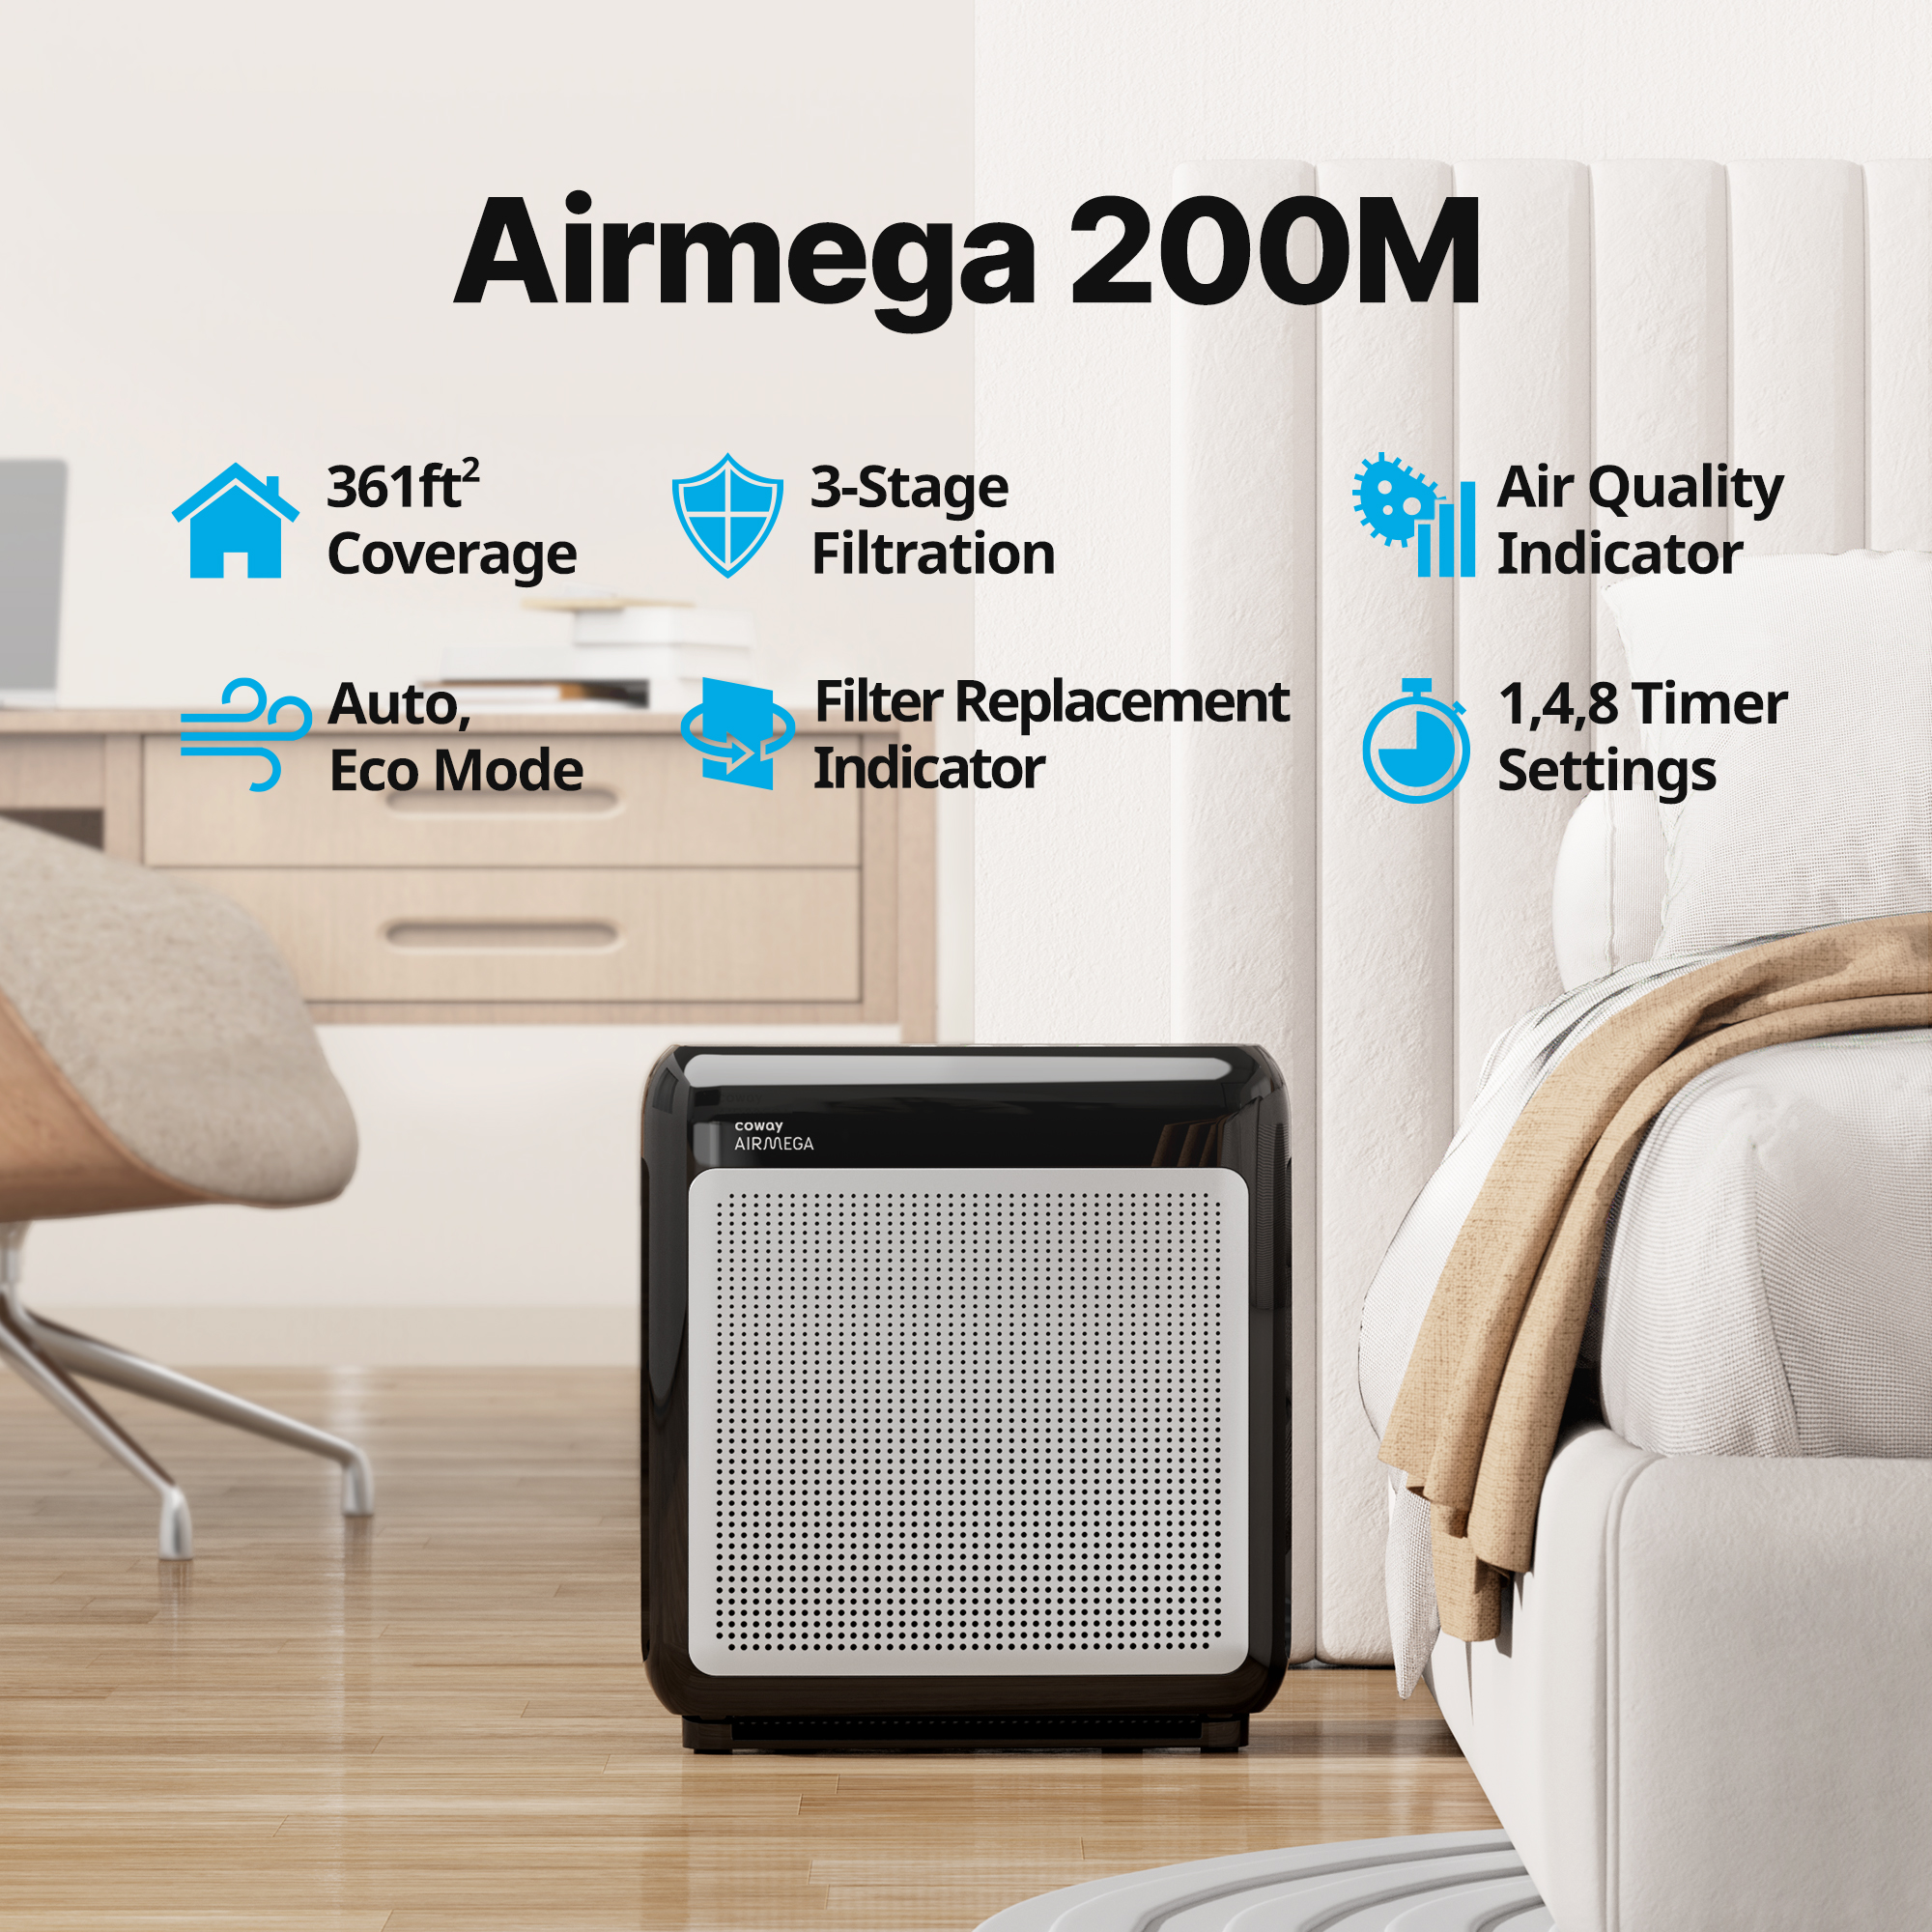 Coway Air Purifier Airmega 200M True HEPA with 361 sq. ft. Coverage in Black - image 2 of 12